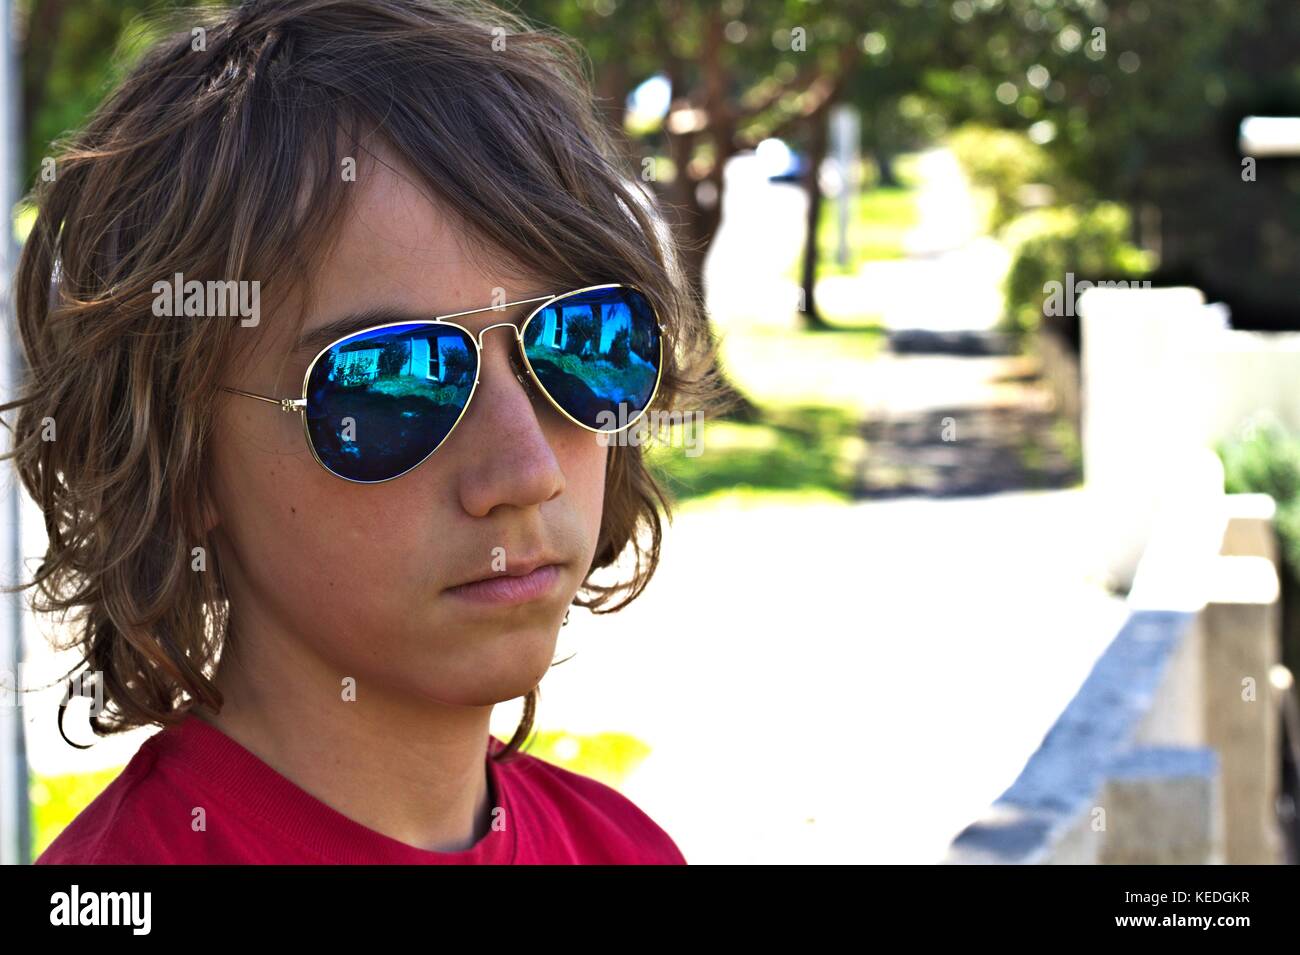 Young teenage male wearing blue sunglasses head shot against suburban background. Stock Photo